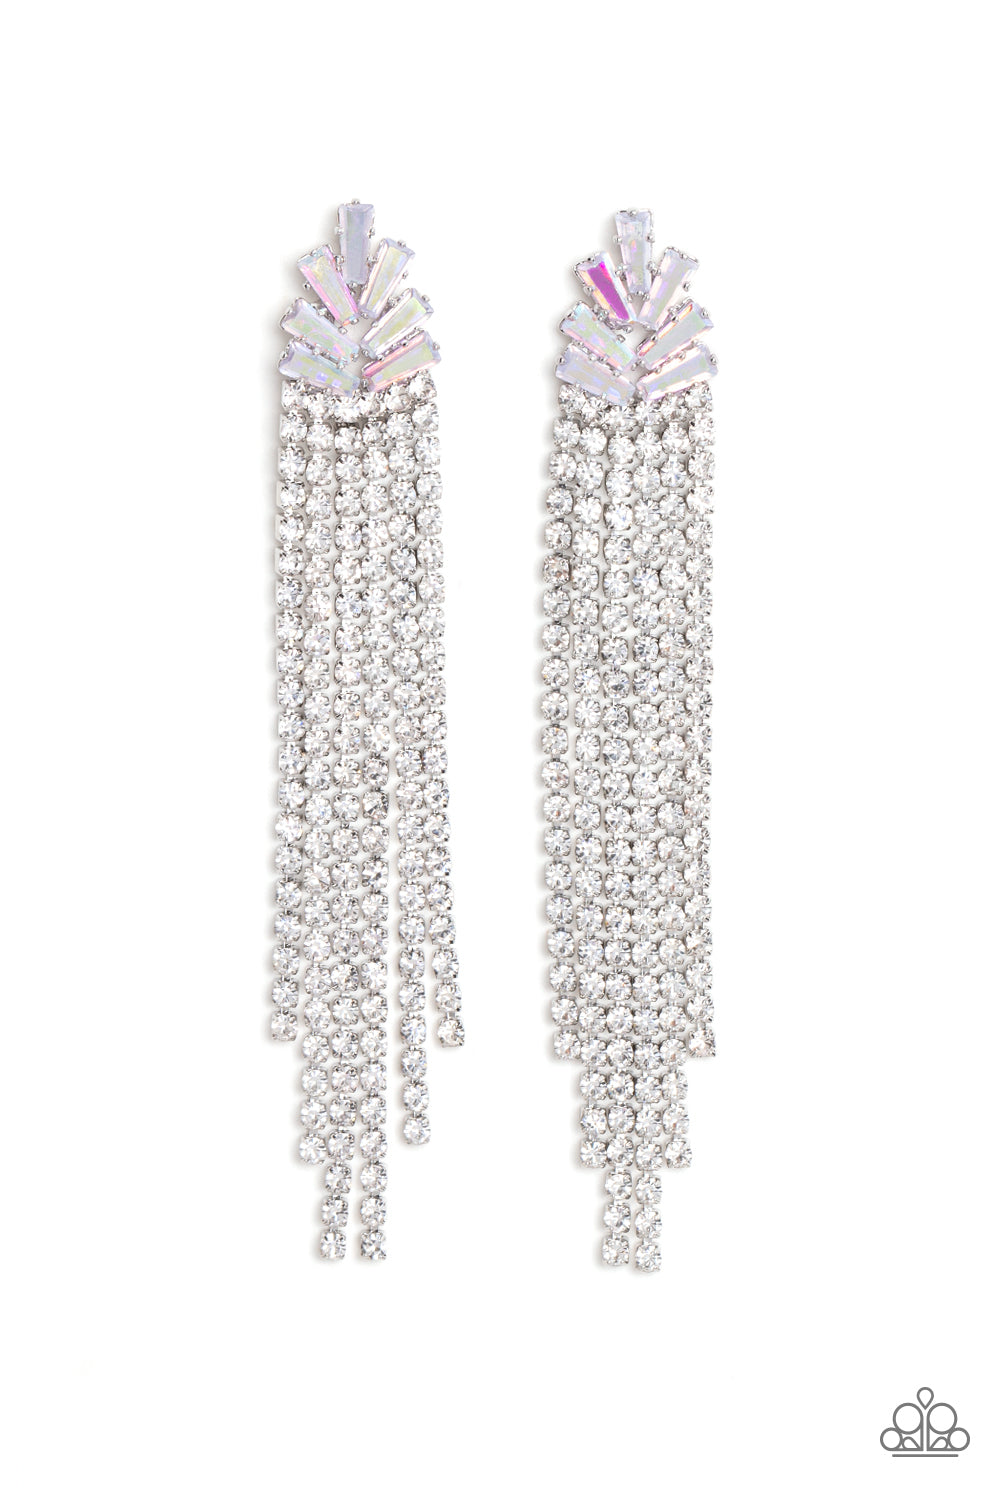 Overnight Sensation - Multi Earrings November 2022 Life of the Party Exclusive - Princess Glam Shop